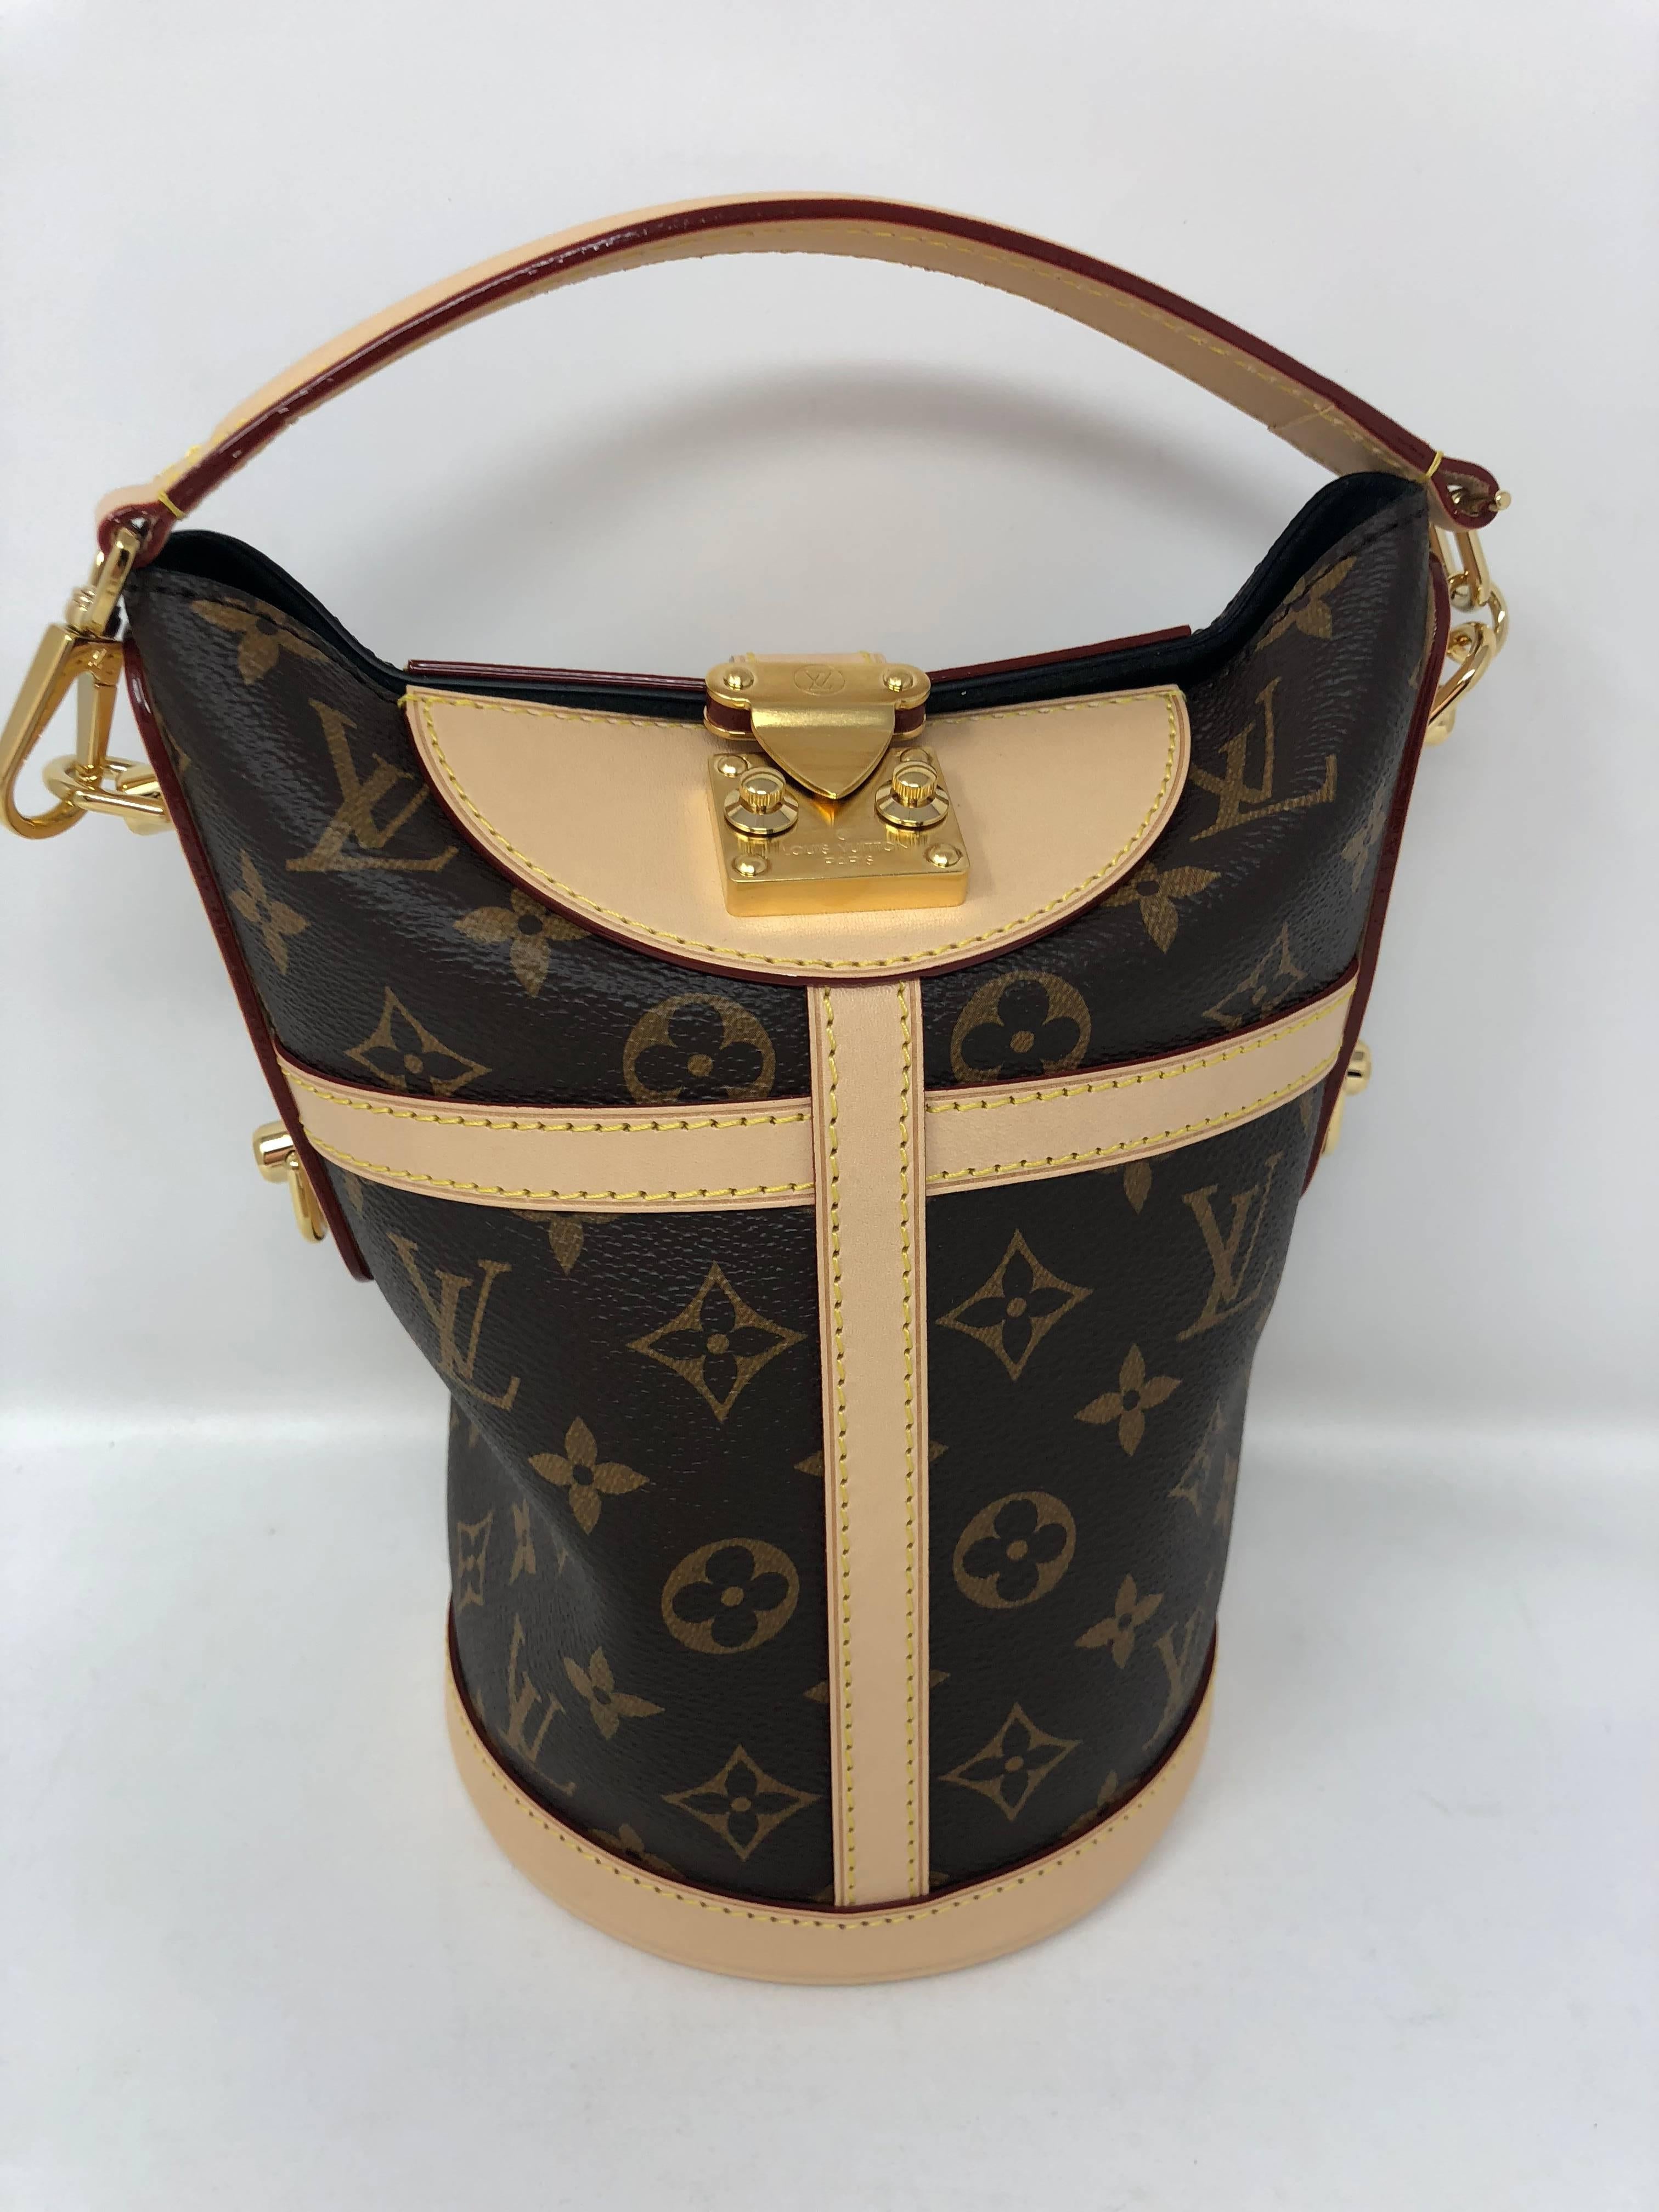 Louis Vuitton Duffle Bag Petite Boite Chapeau Petit Noe Trunk from 2018 Runway Collection. Brand new and sold out.  Comes with detachable strap to be worn 2 ways. 